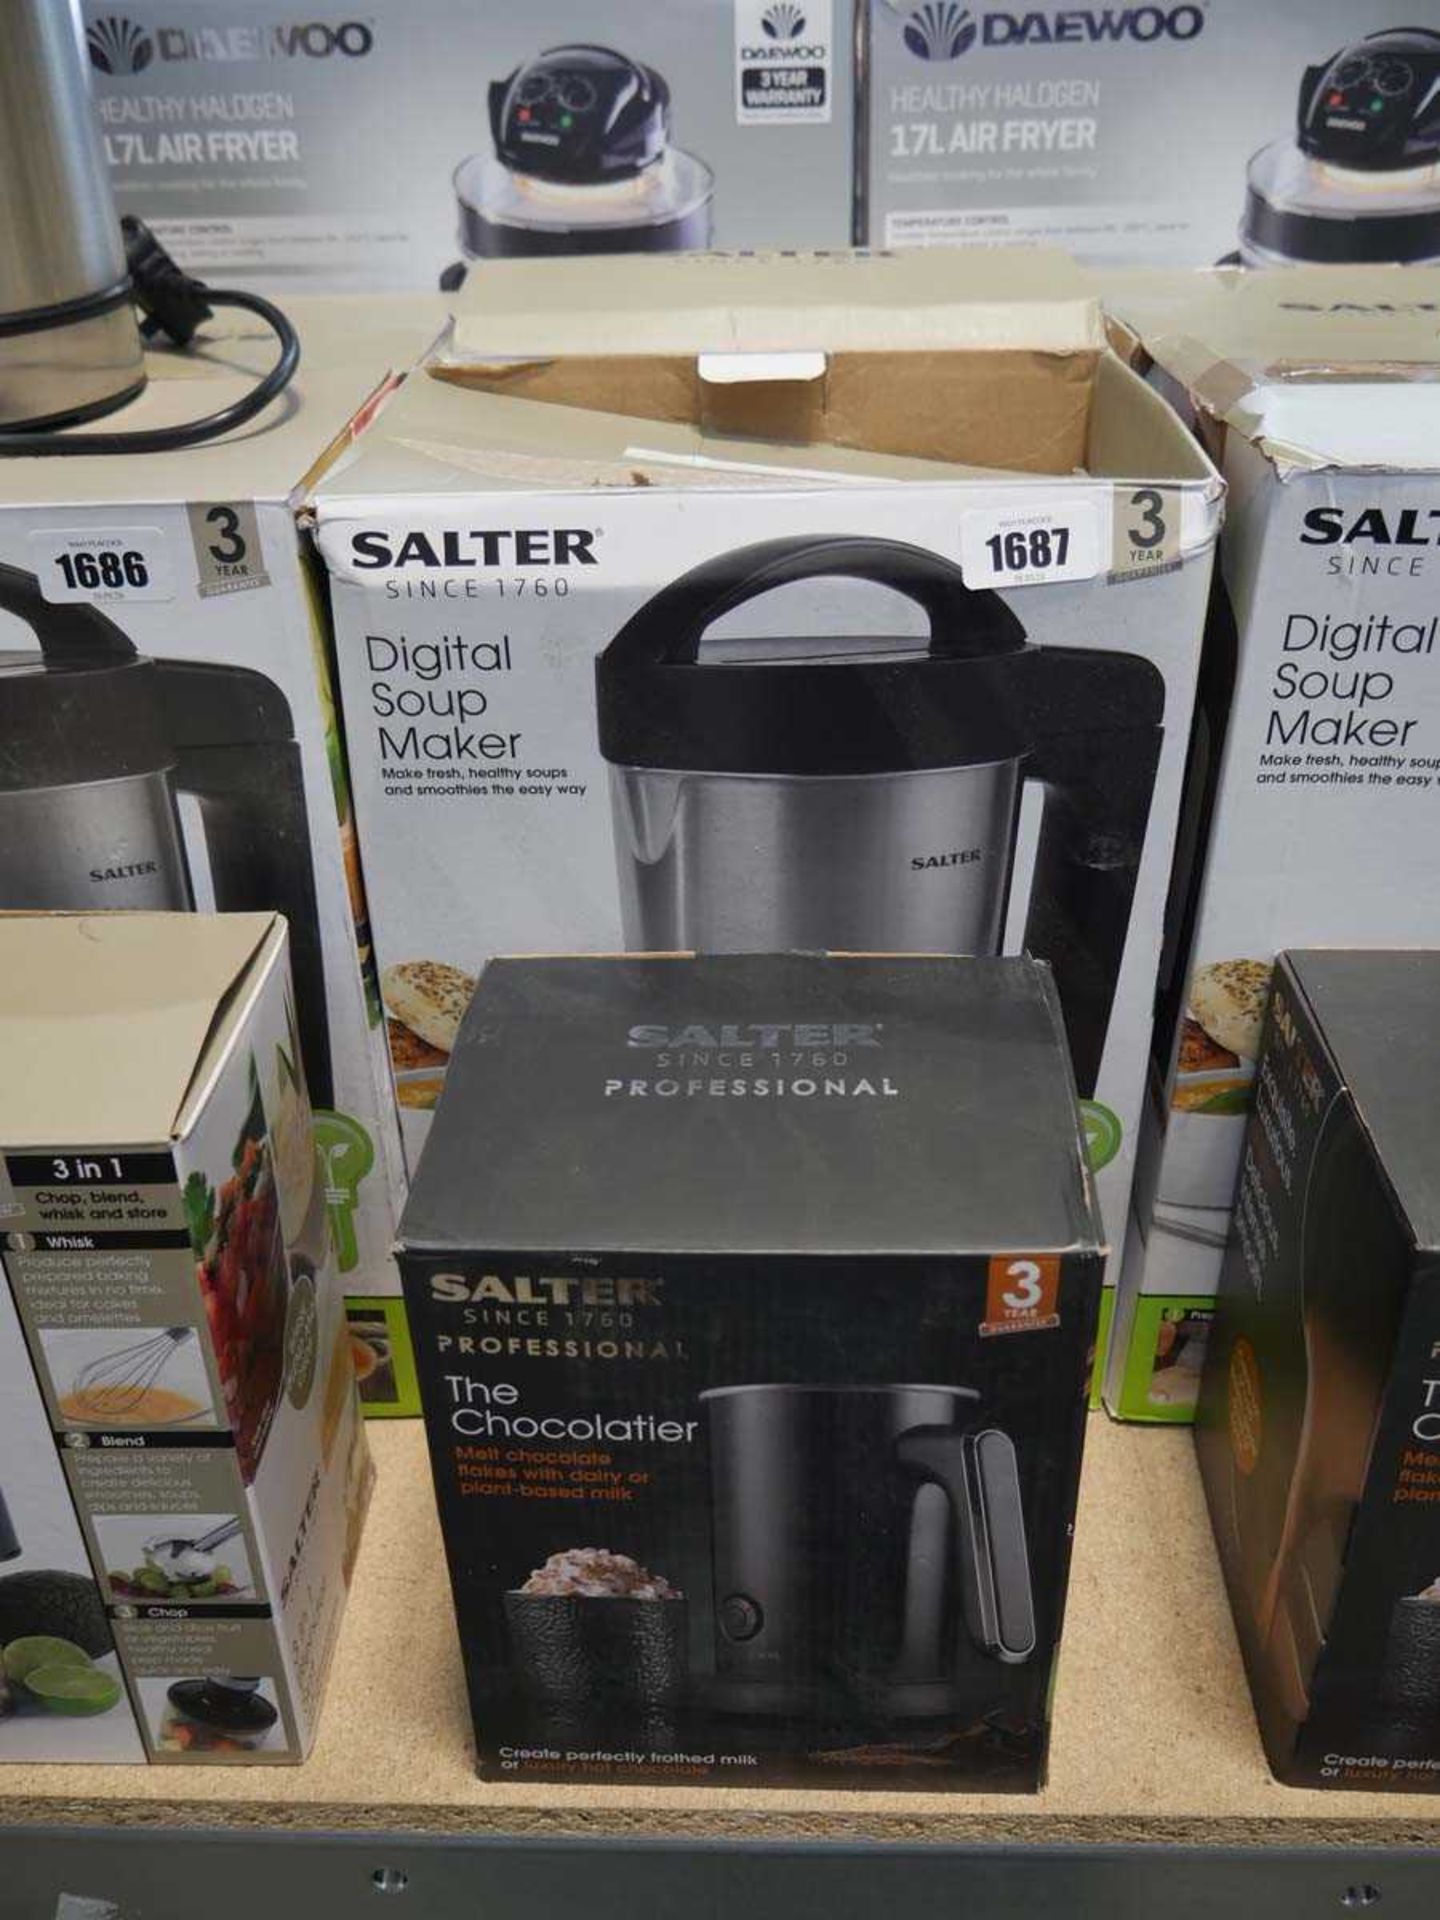 2 Salter digital soup makers with Salter The Chocolatier